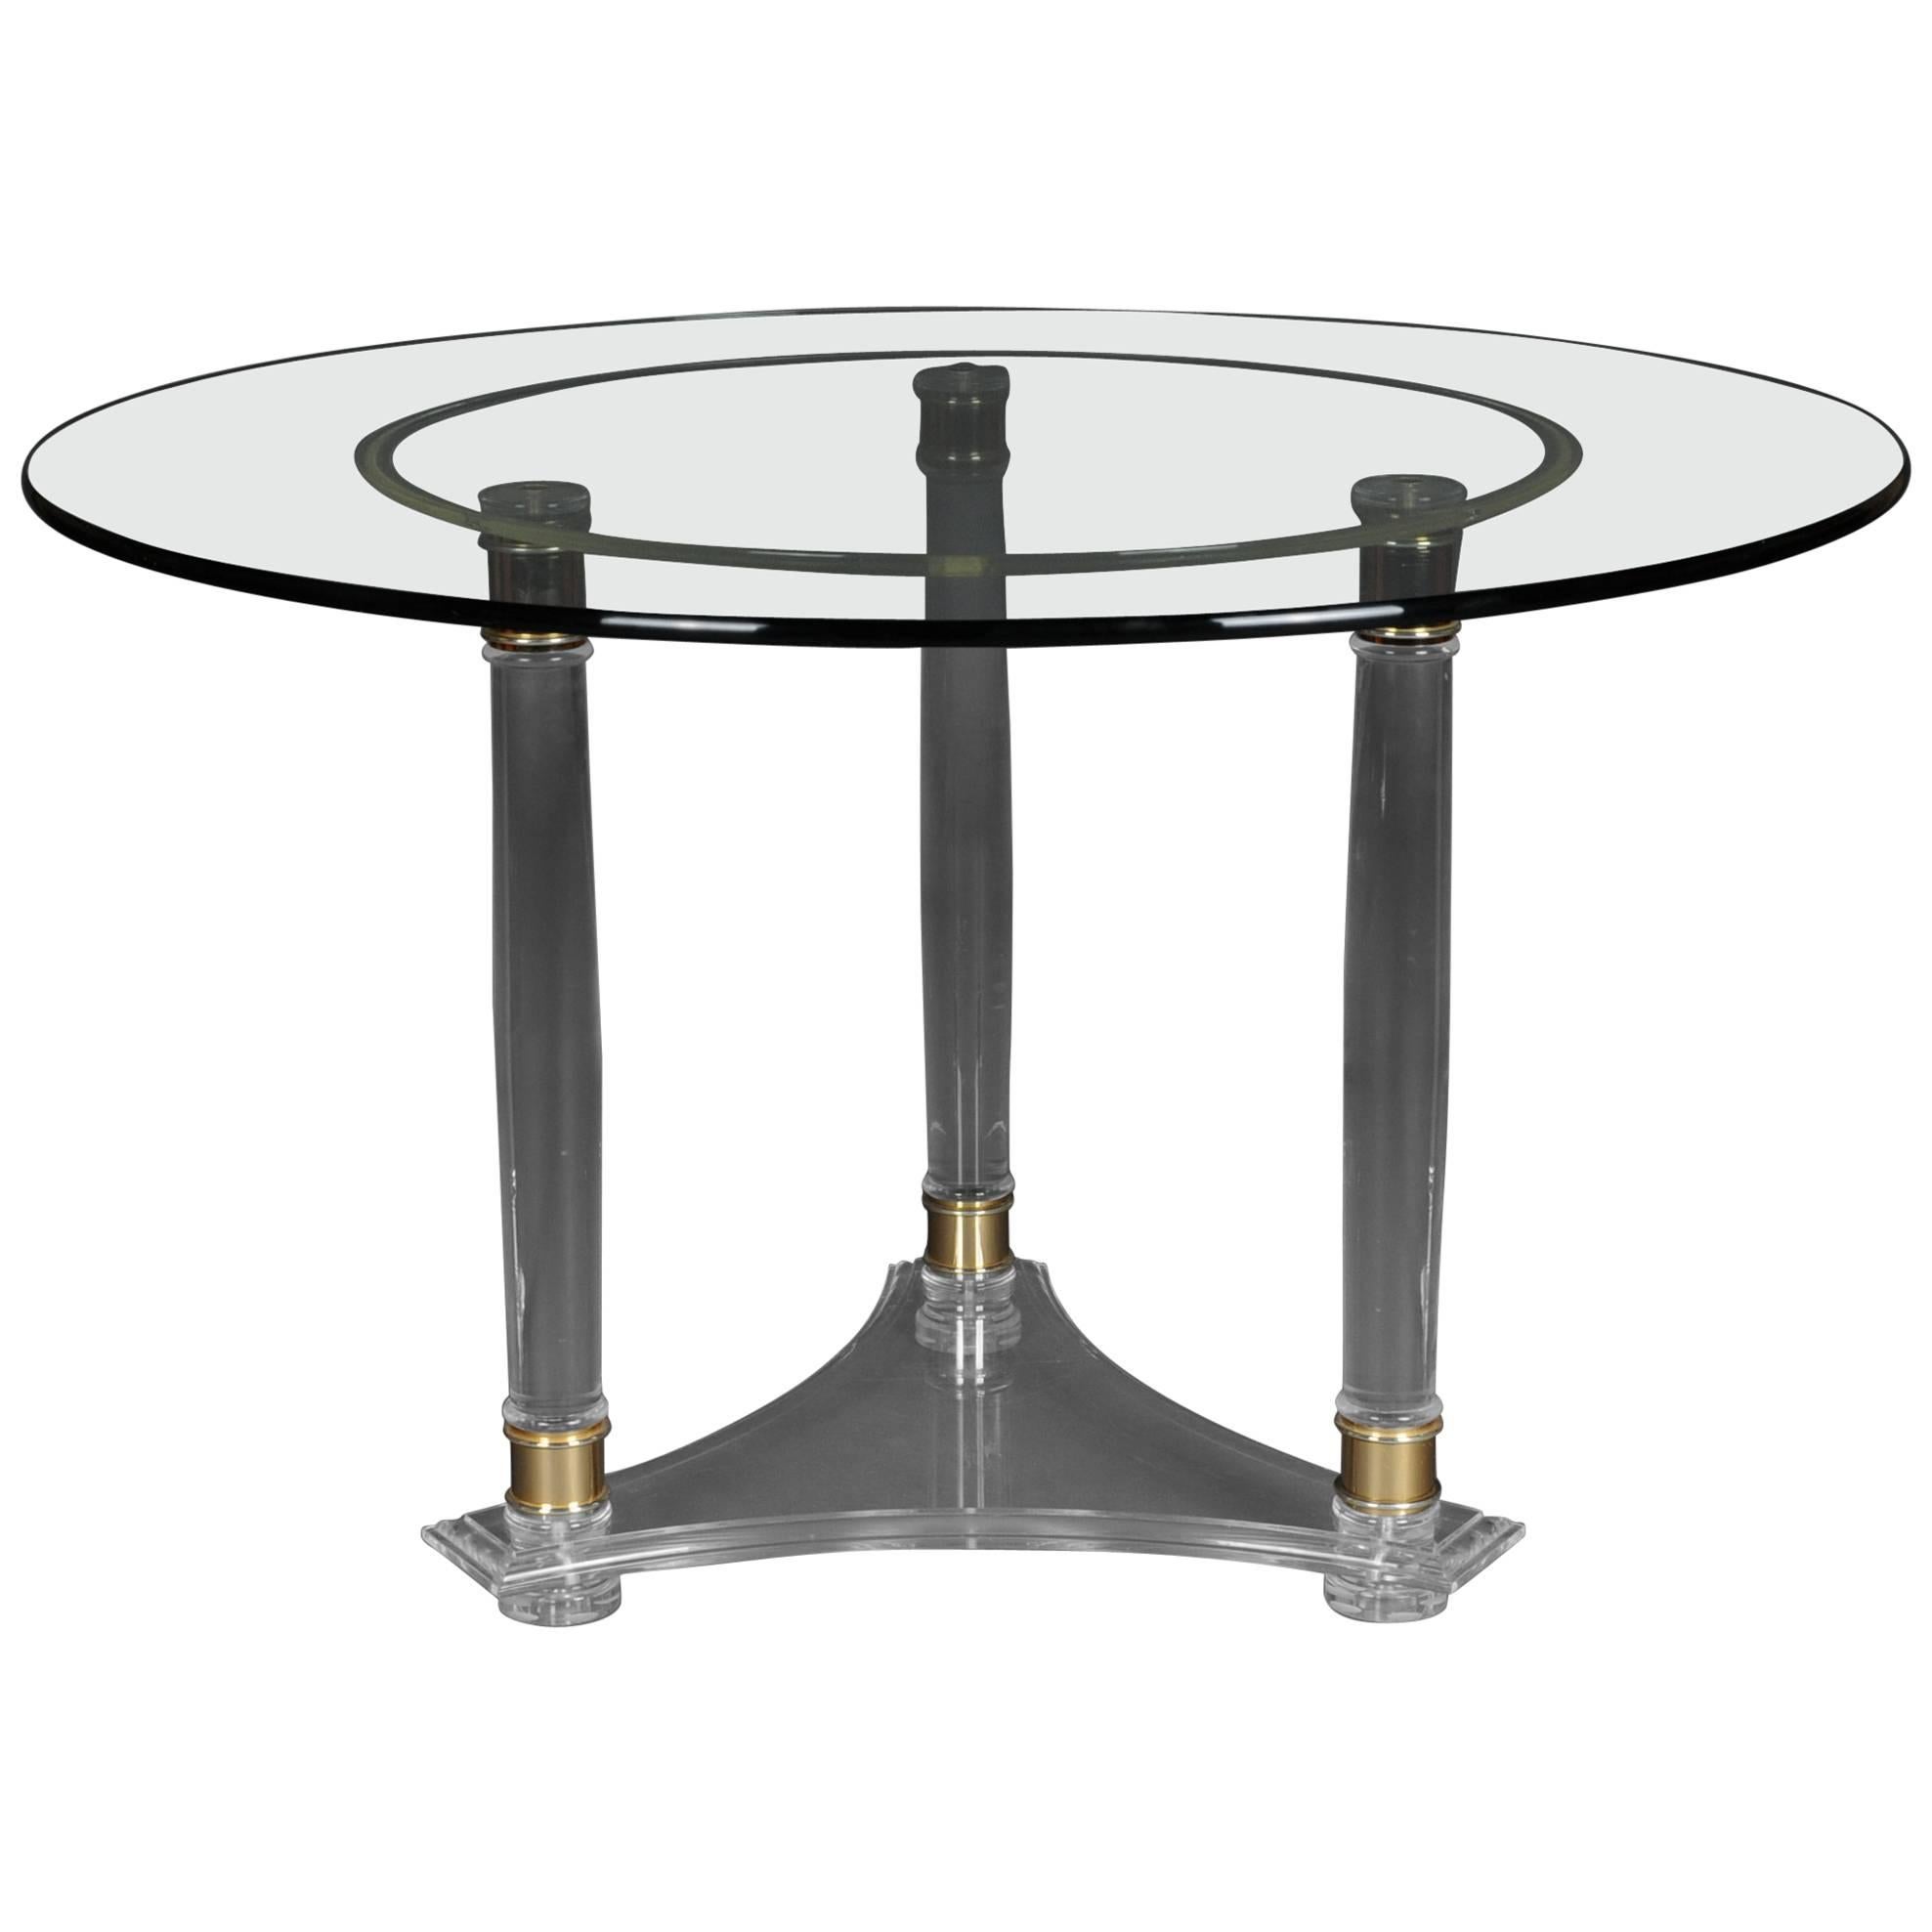 Large, Round Designer Acrylic Table with Brass